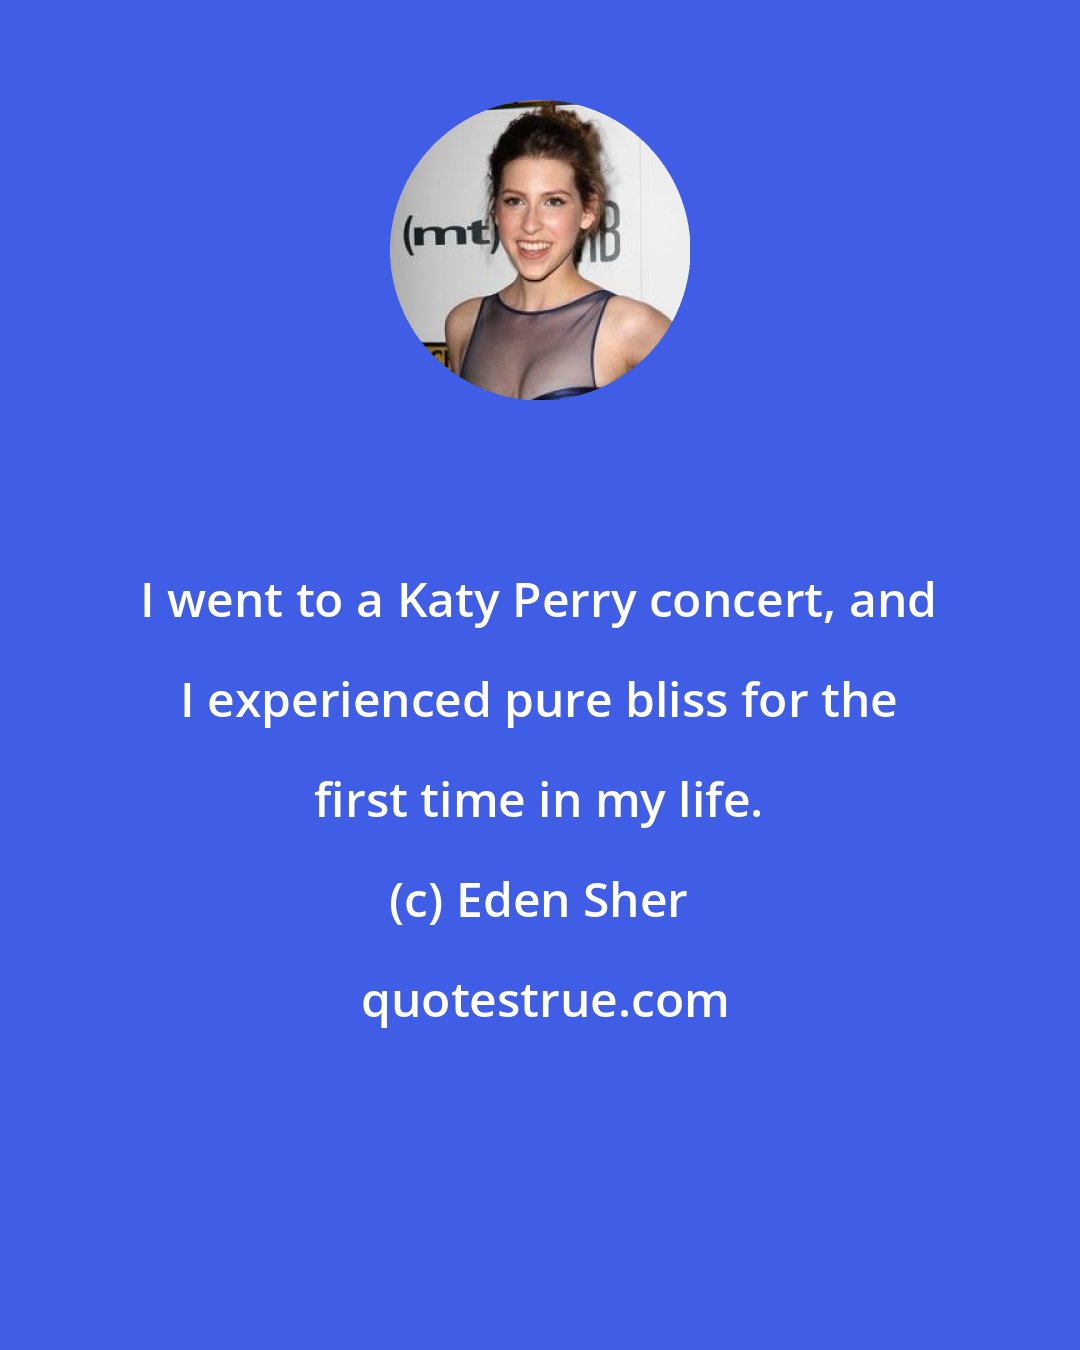 Eden Sher: I went to a Katy Perry concert, and I experienced pure bliss for the first time in my life.